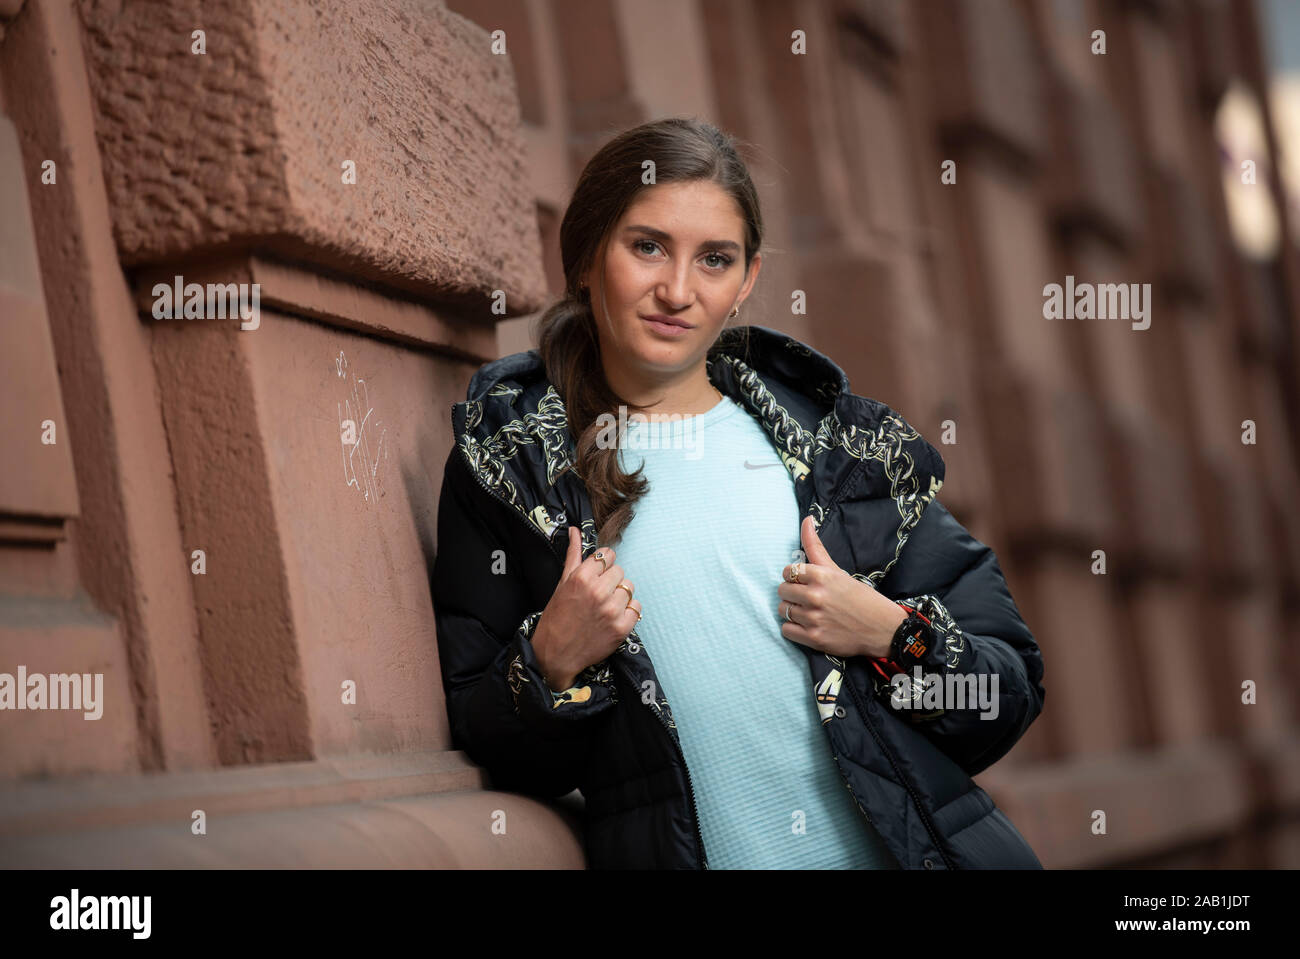 19 November 2019, Hessen, Frankfurt/Main: Athlete Gesa Krause is standing on a street in the station district during a photo session with the dpa. Photo: Boris Roessler/dpa Stock Photo